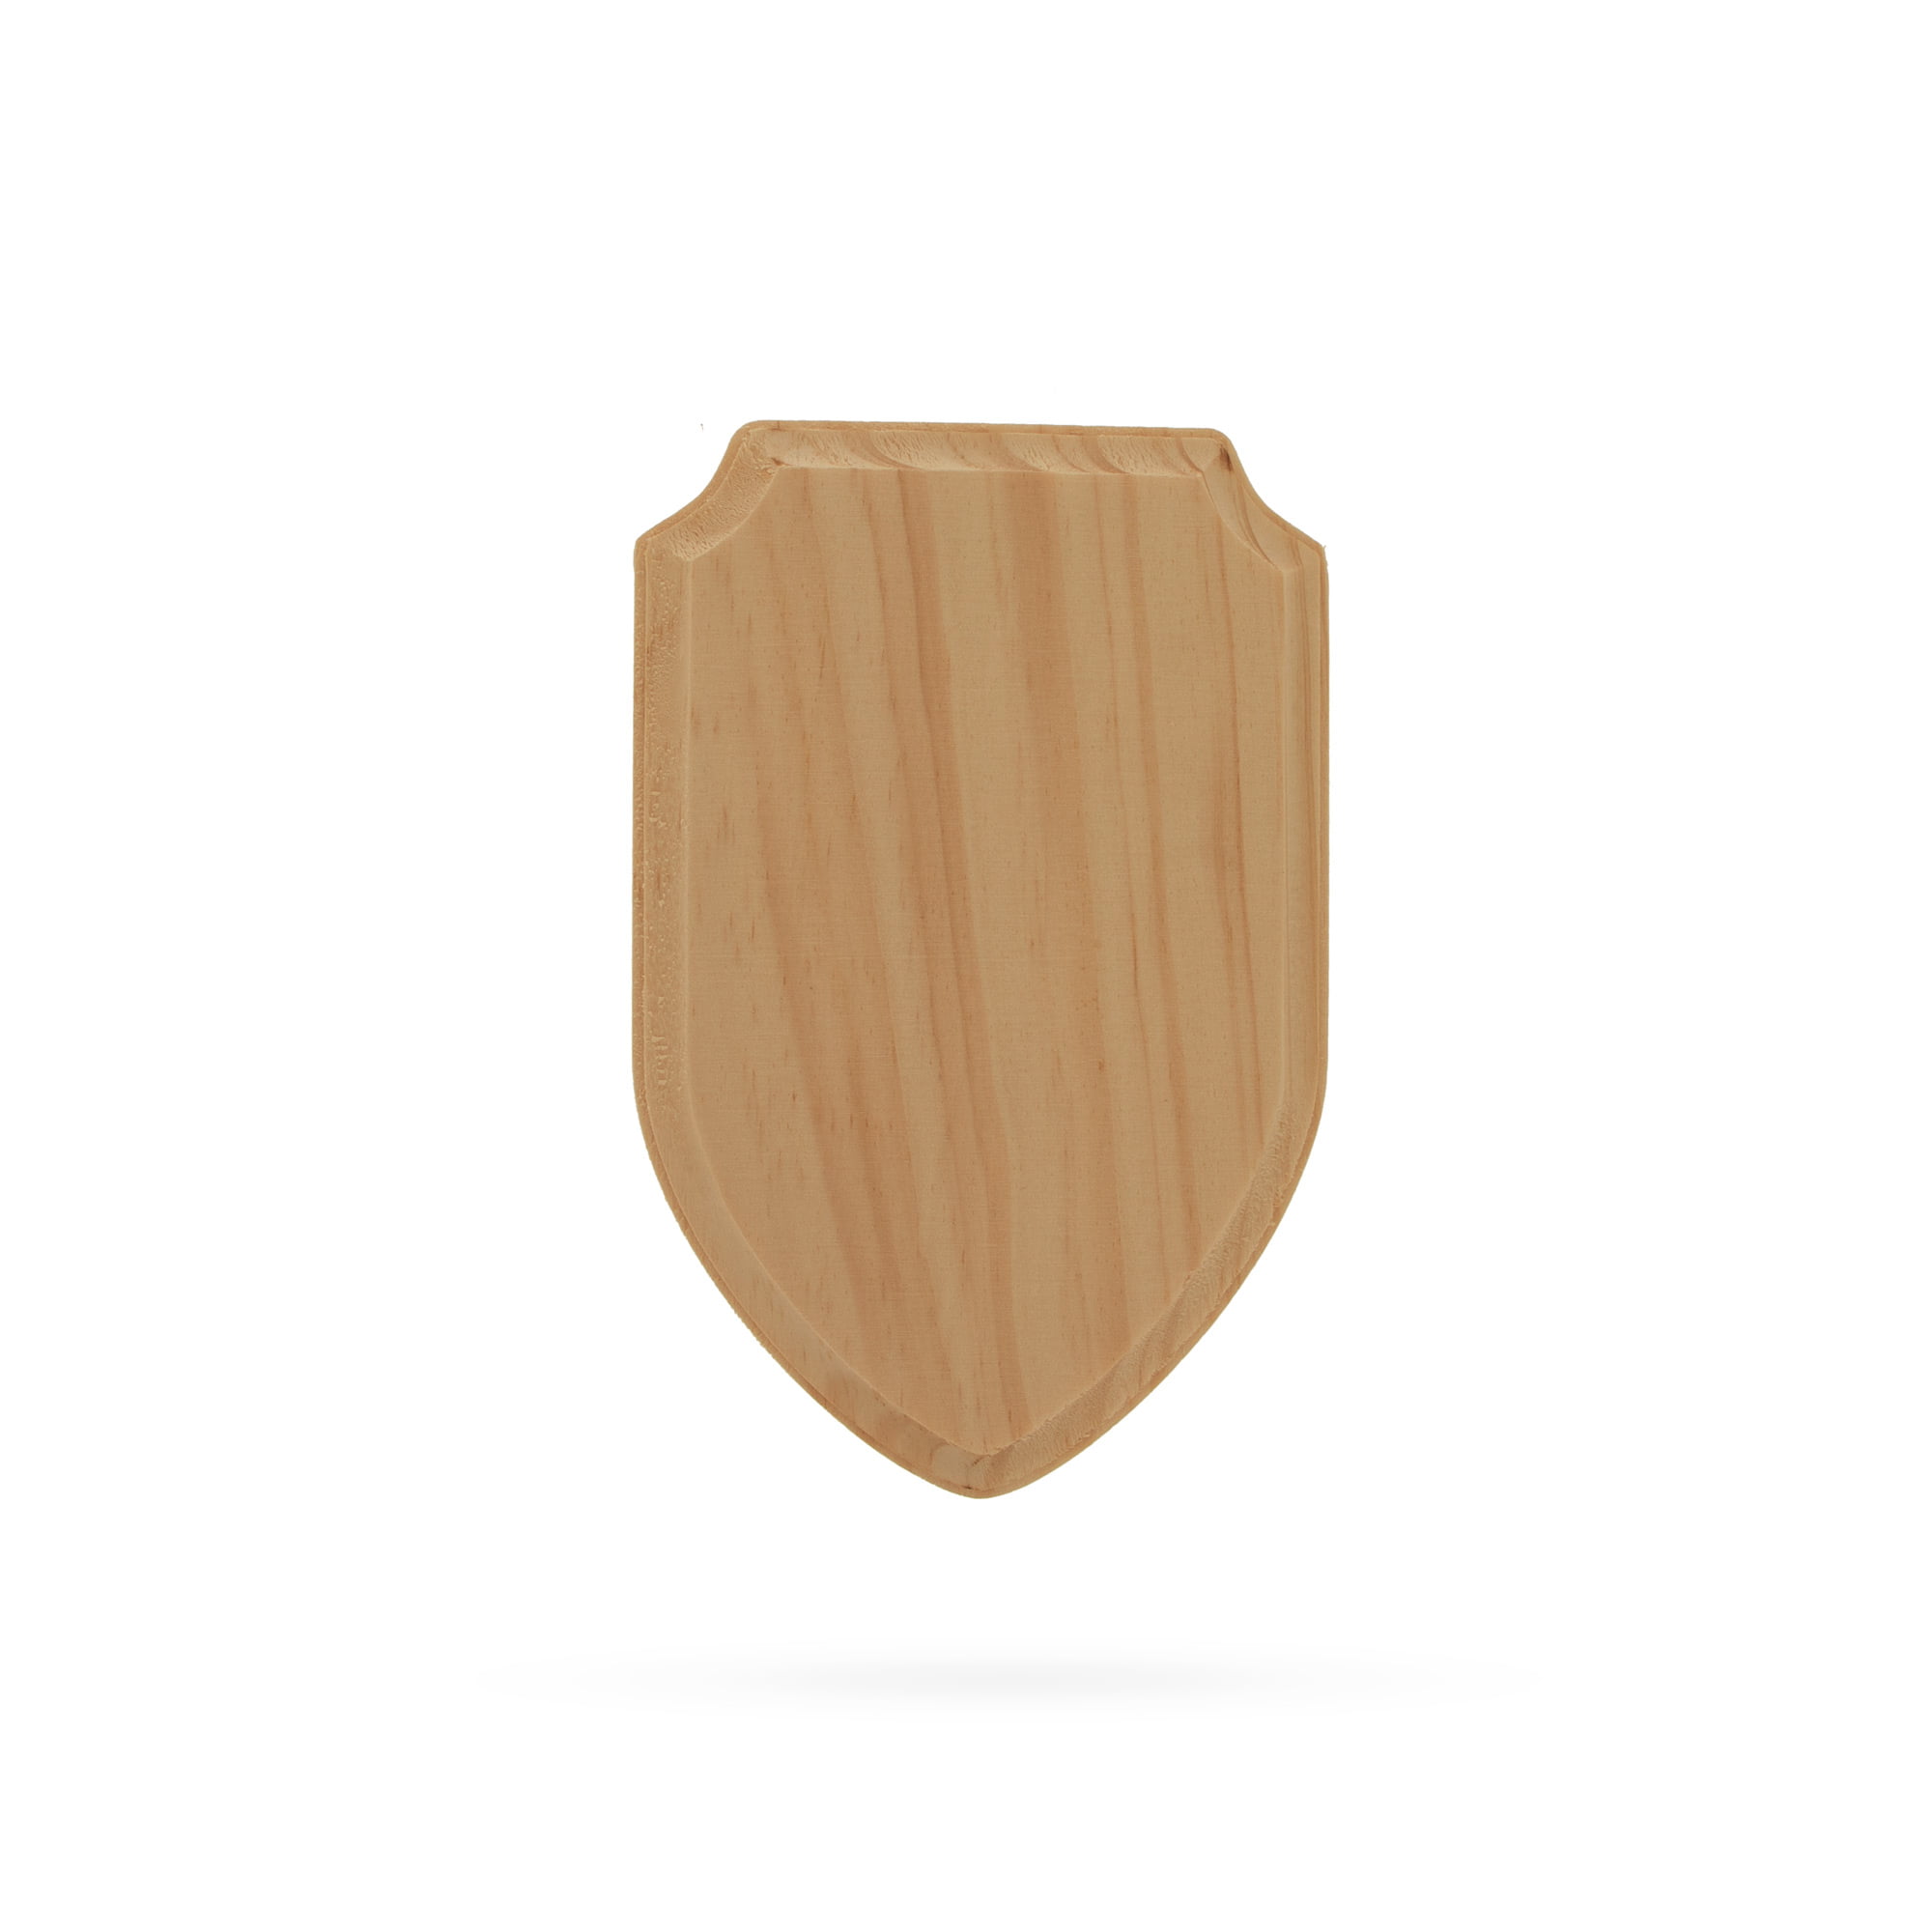 natural  pine wooden shield  plaques